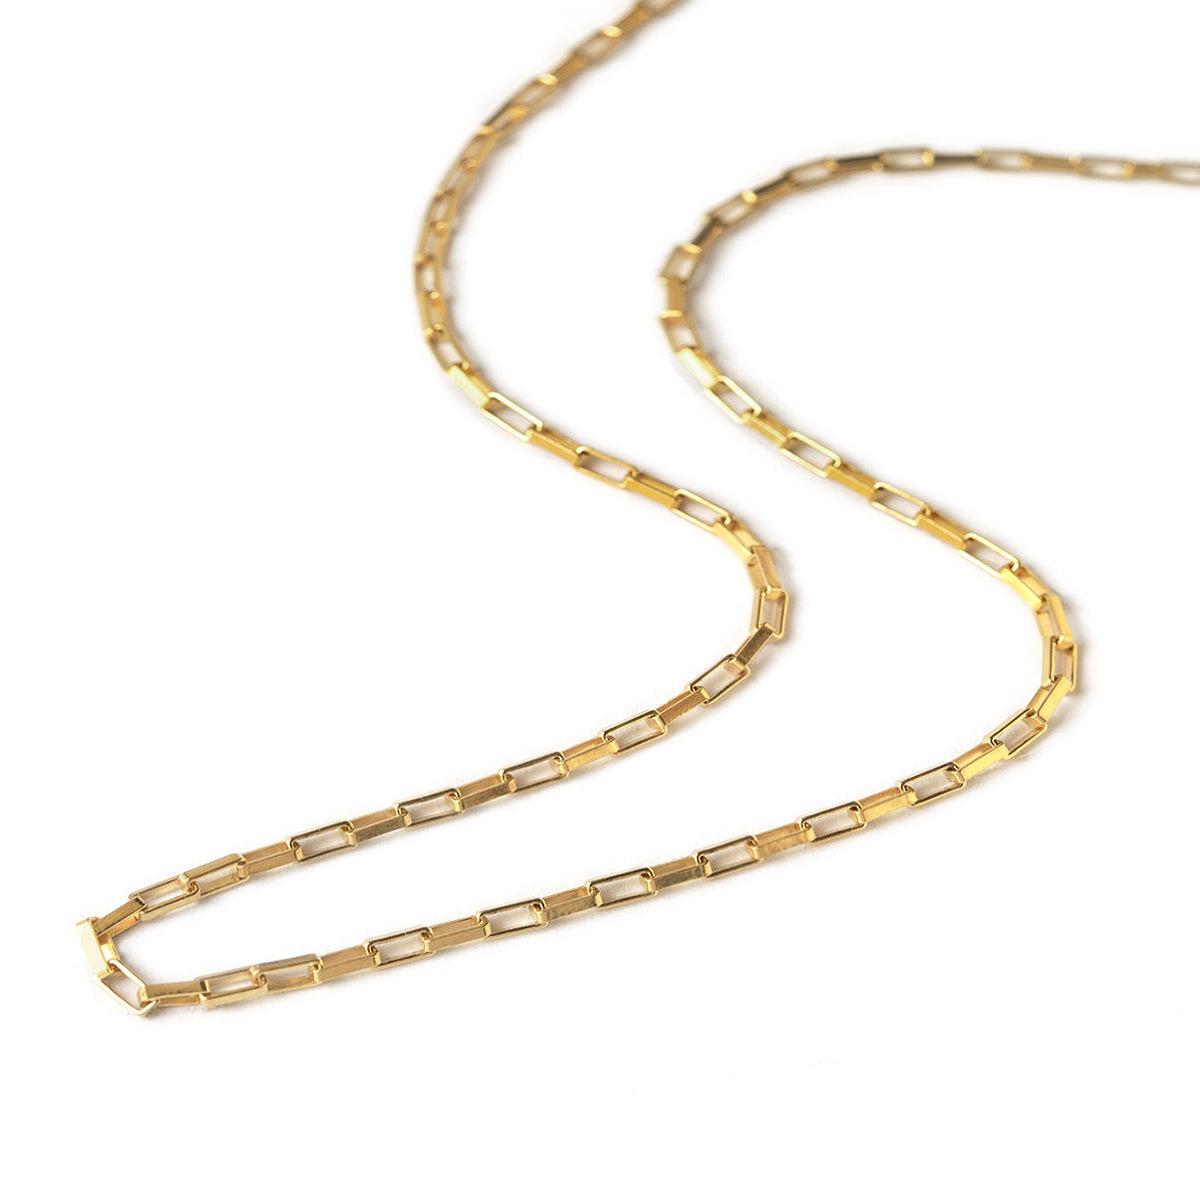 Gold Link Chain Necklace, Dainty 